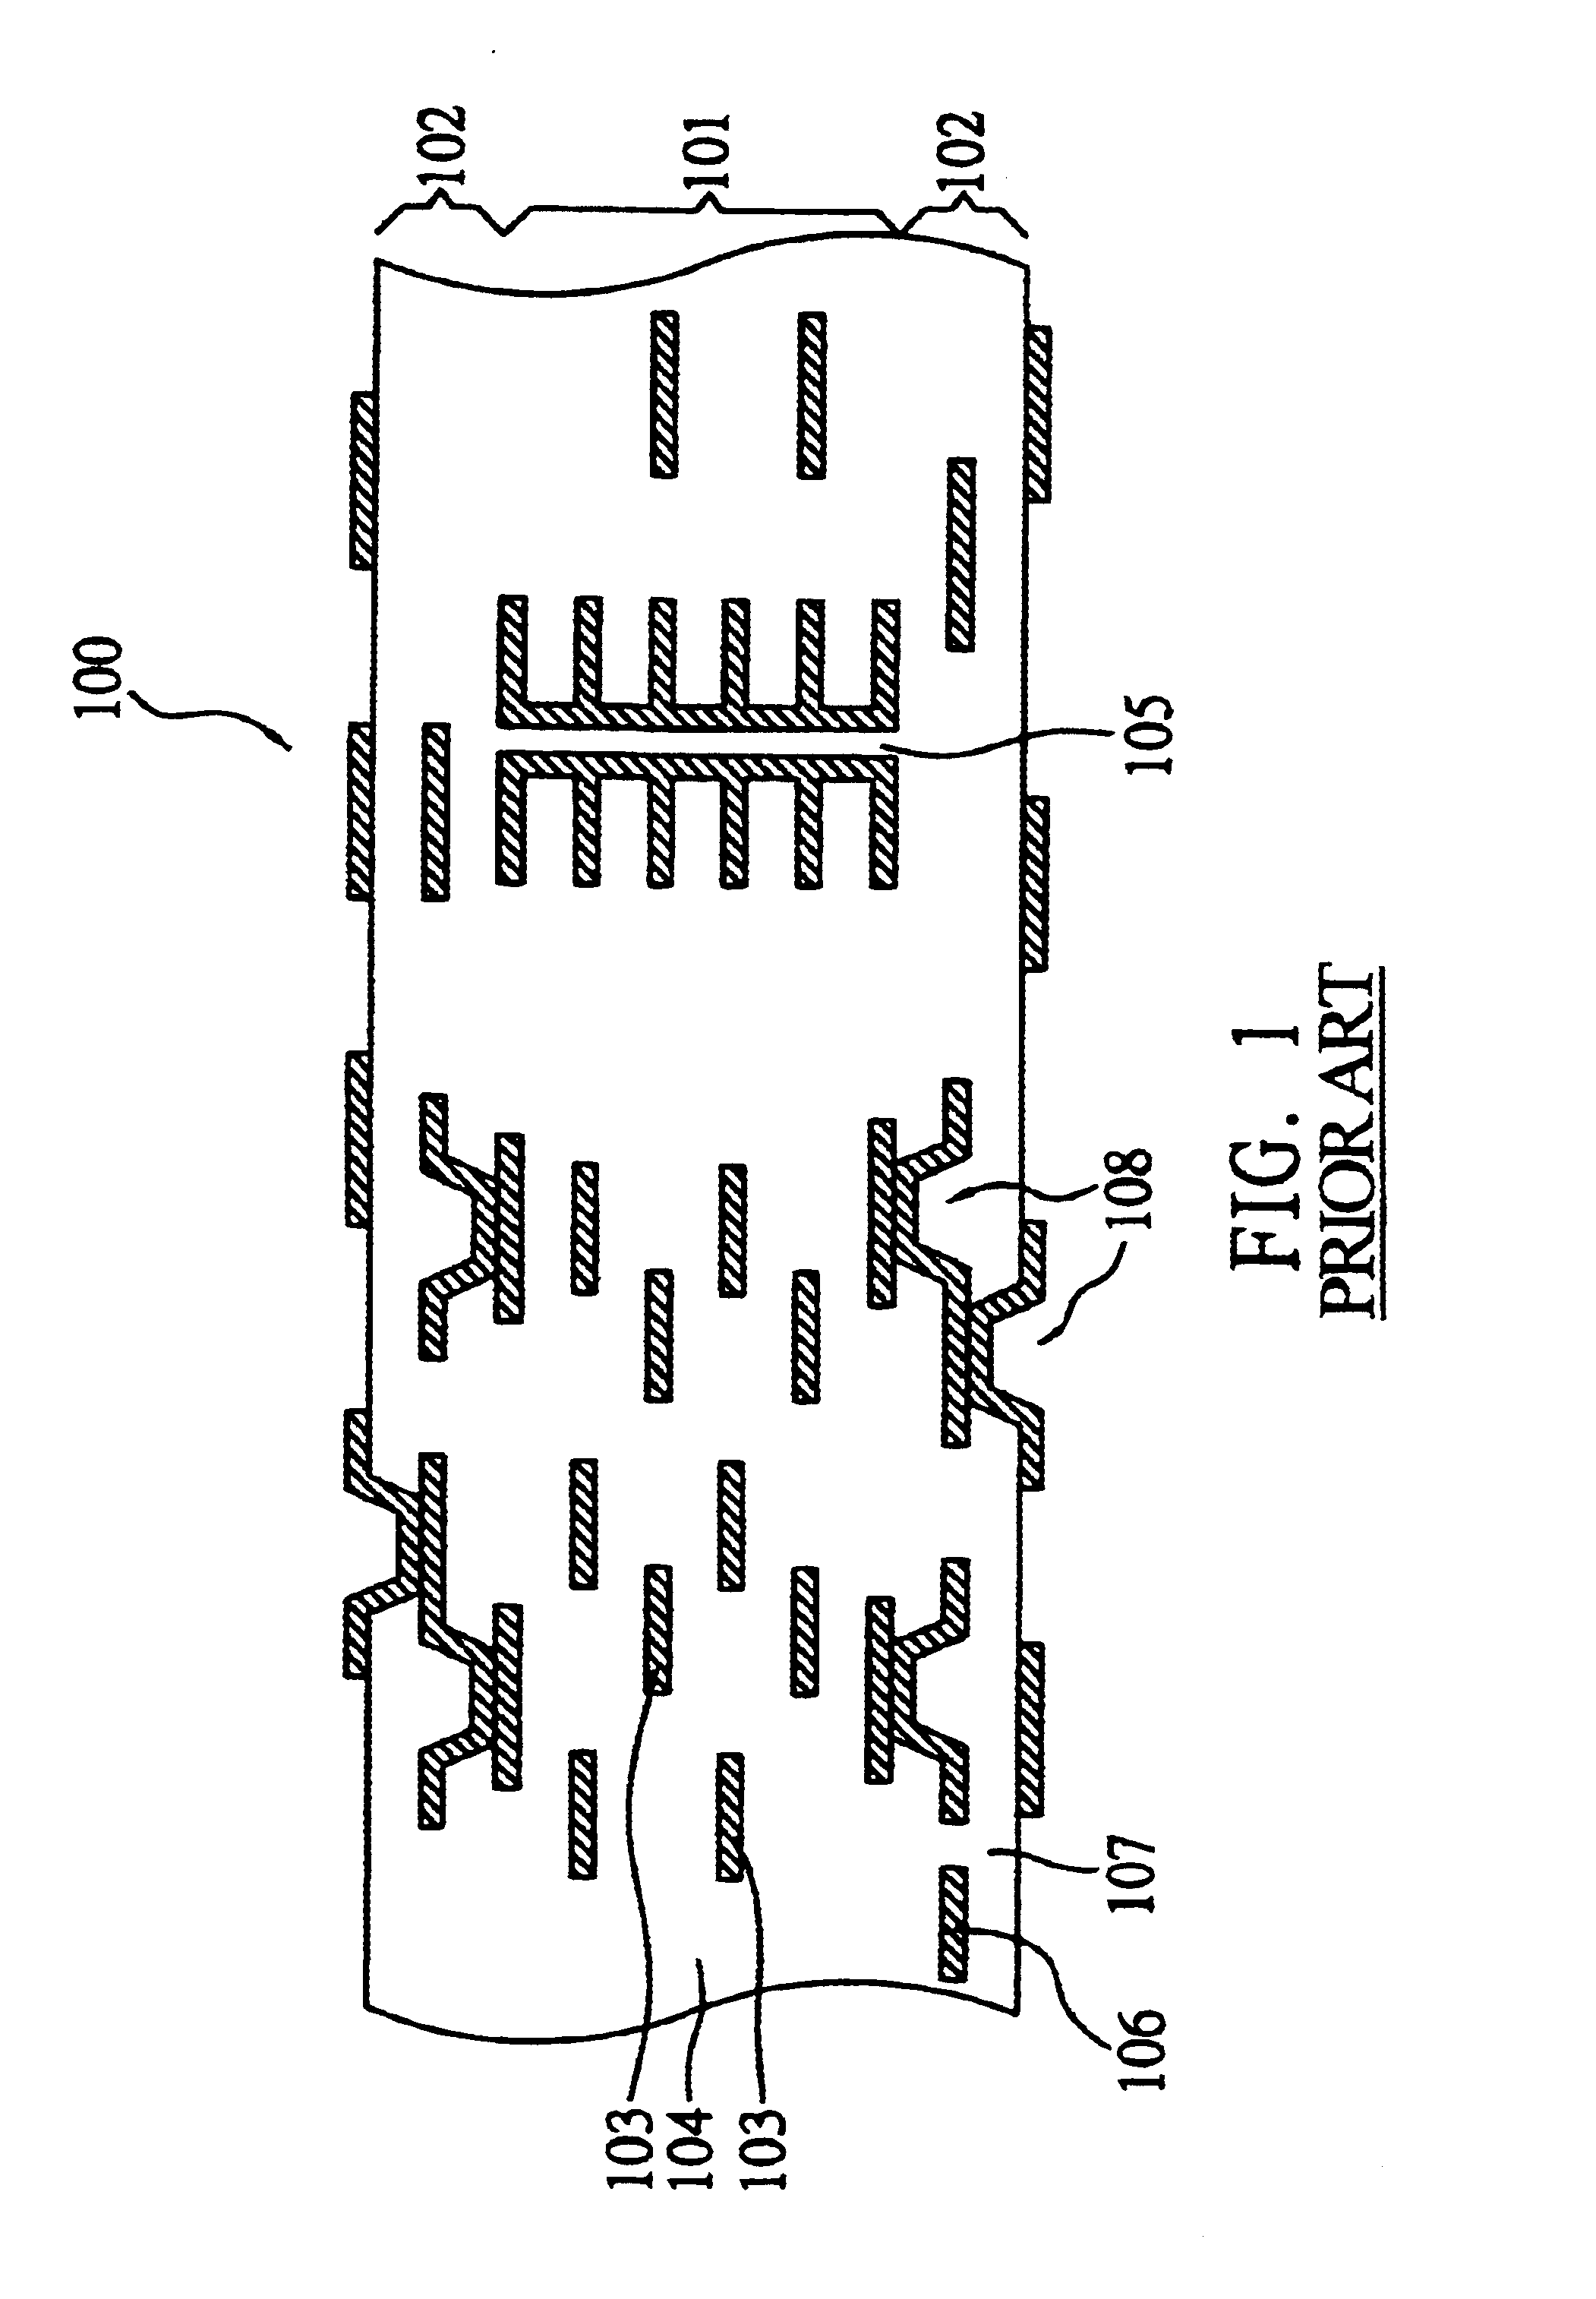 Substrate with stacked vias and fine circuits thereon, and method for fabricating the same